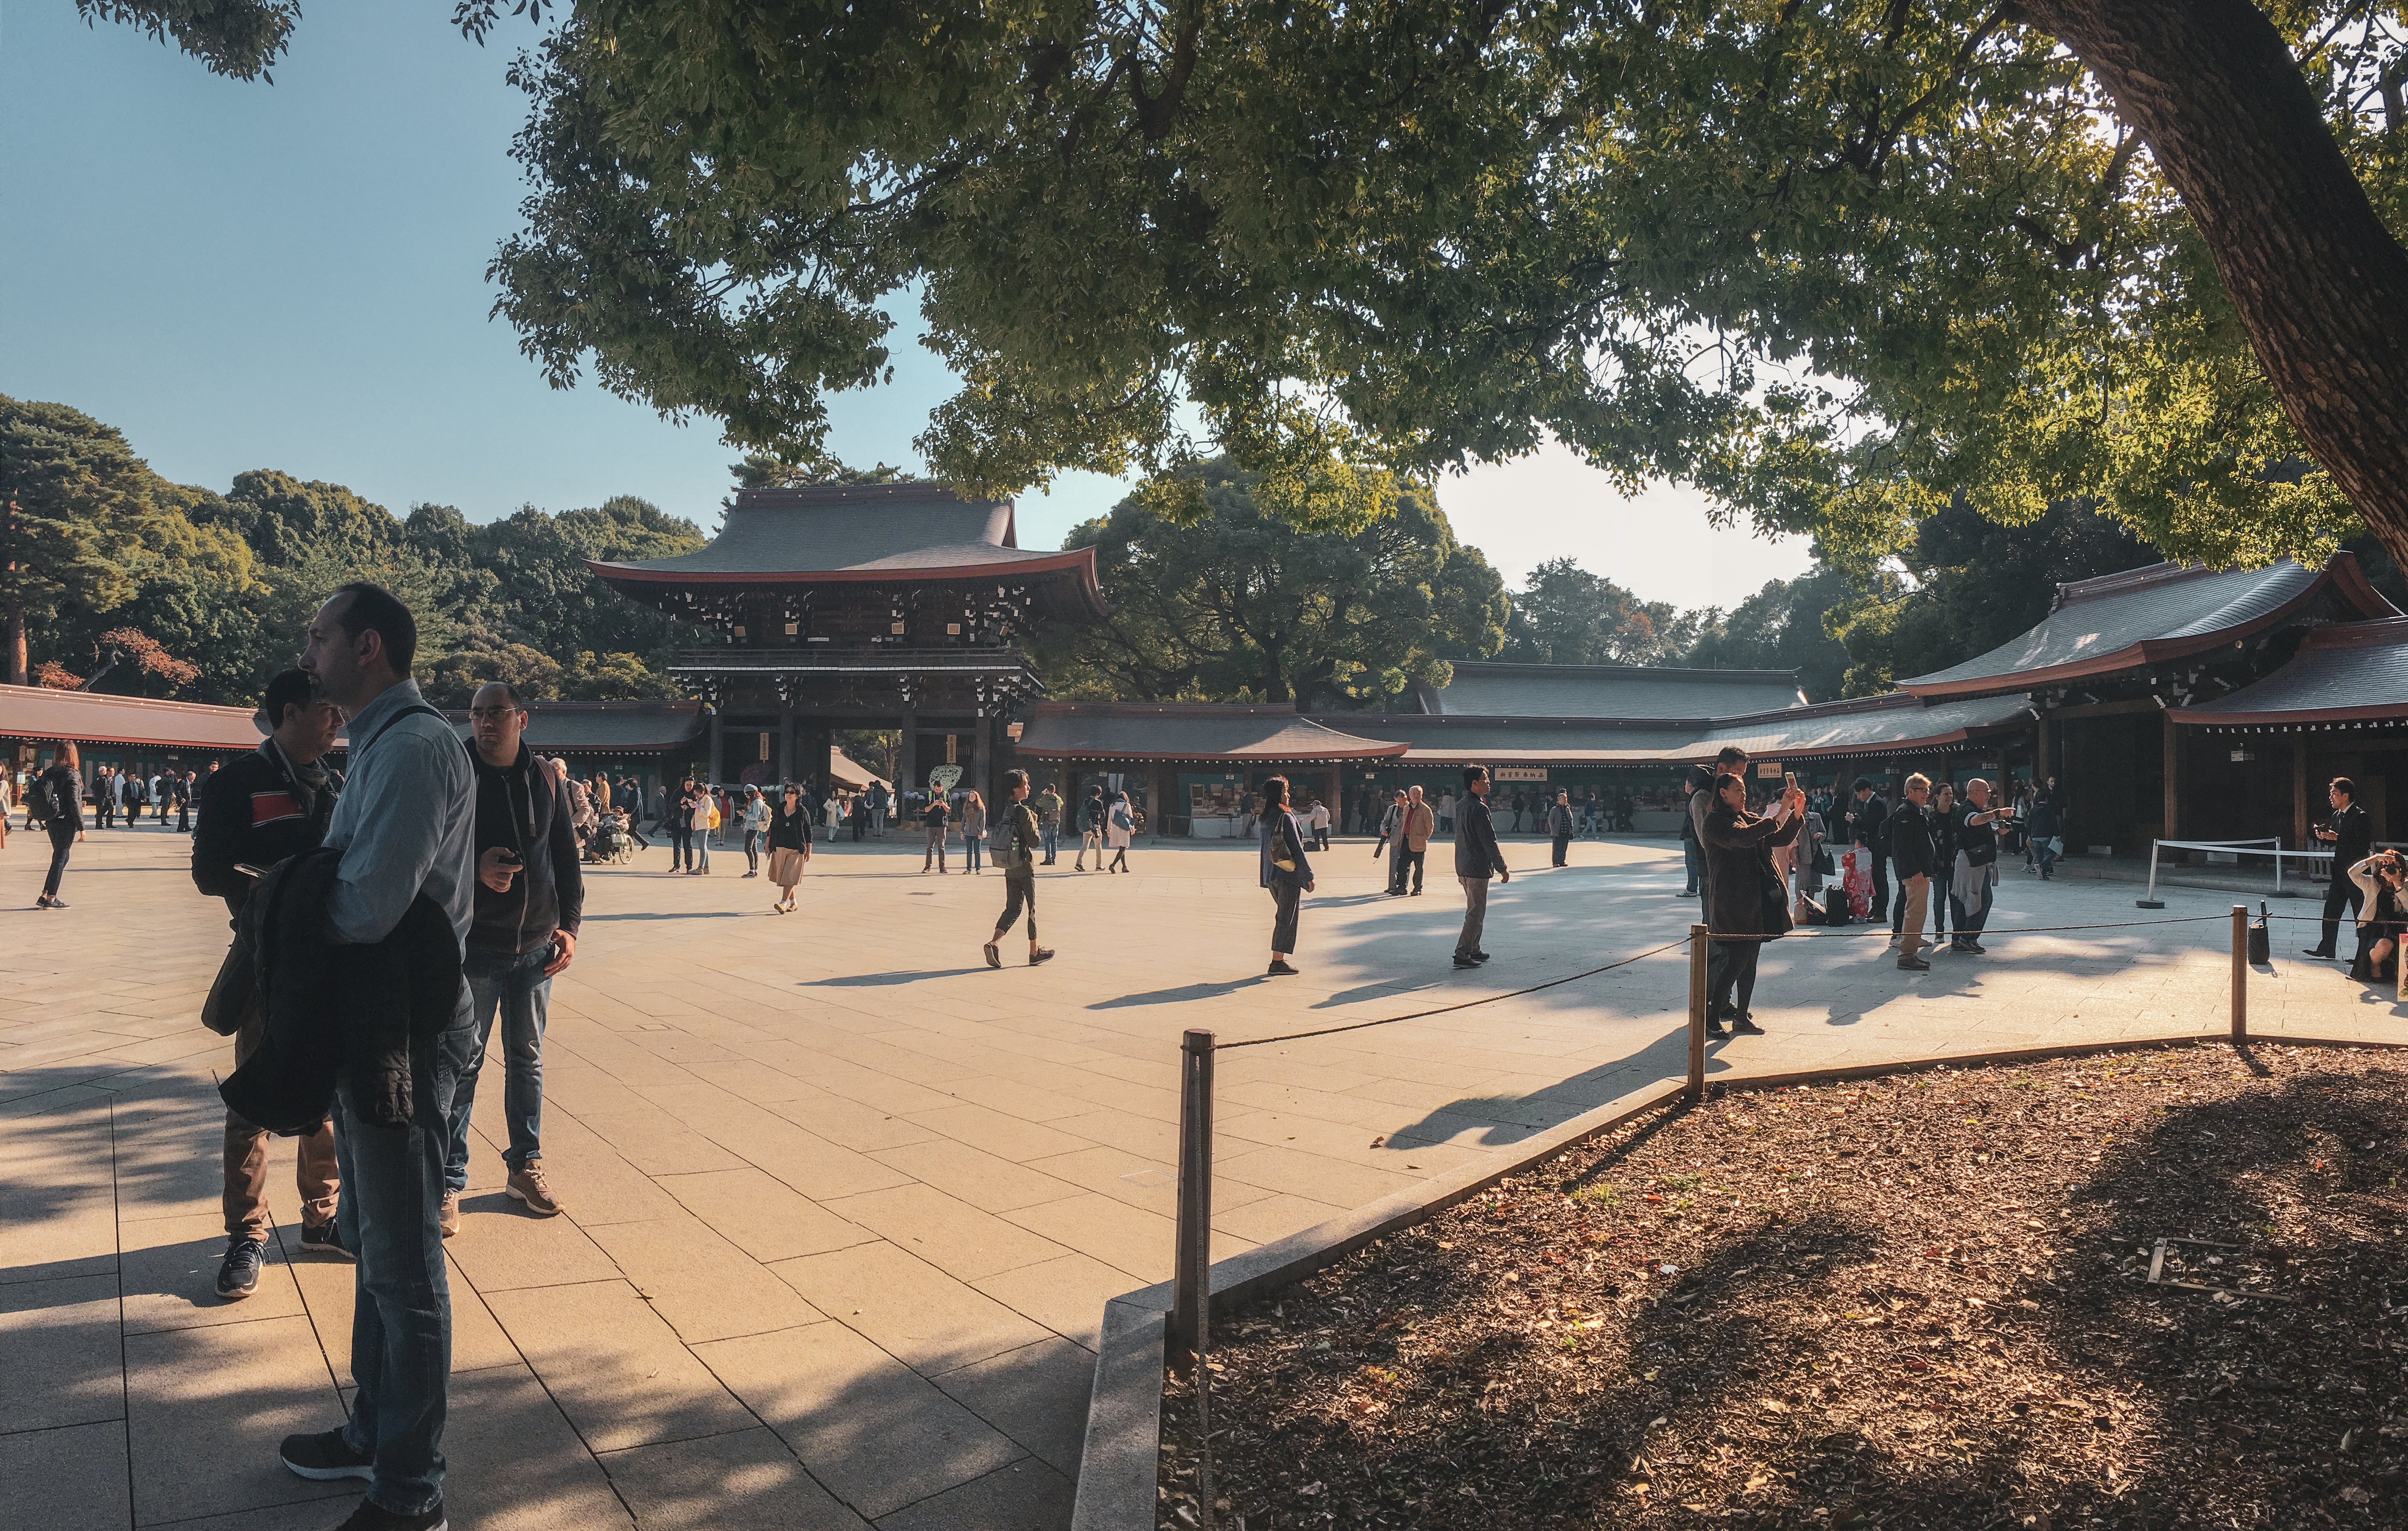 The first day was spent at the Meiji Shrine!